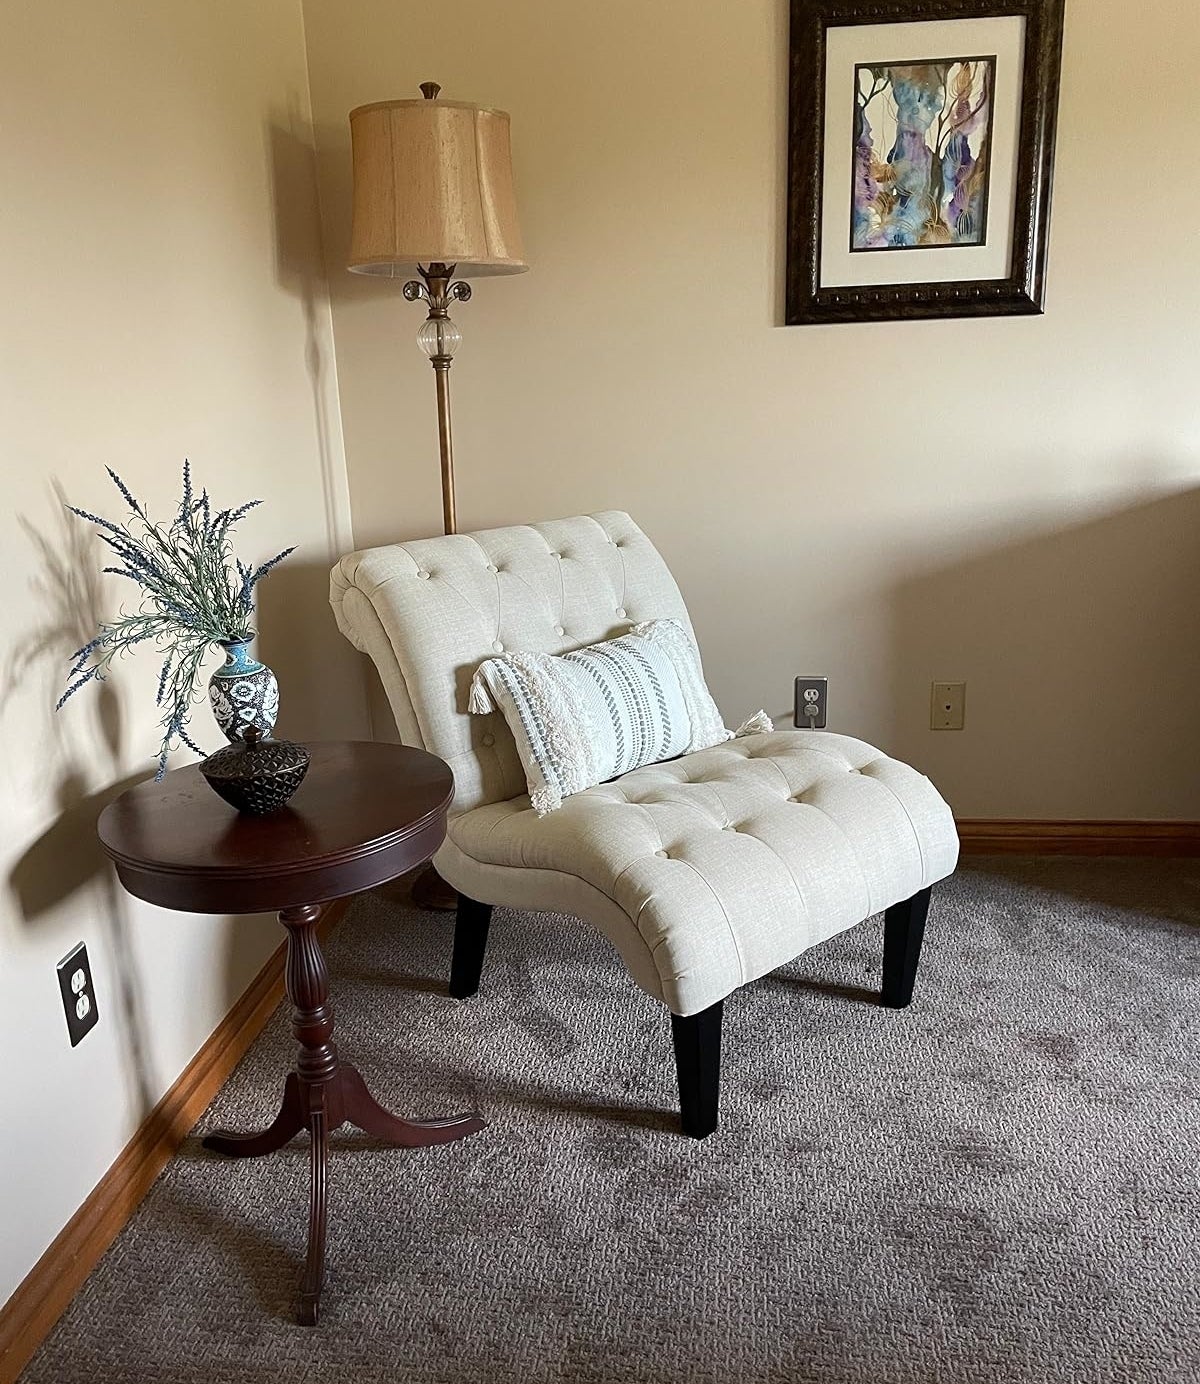 Elegant tufted armchair with beige upholstery, beside a wood side table with decorative items and a floor lamp